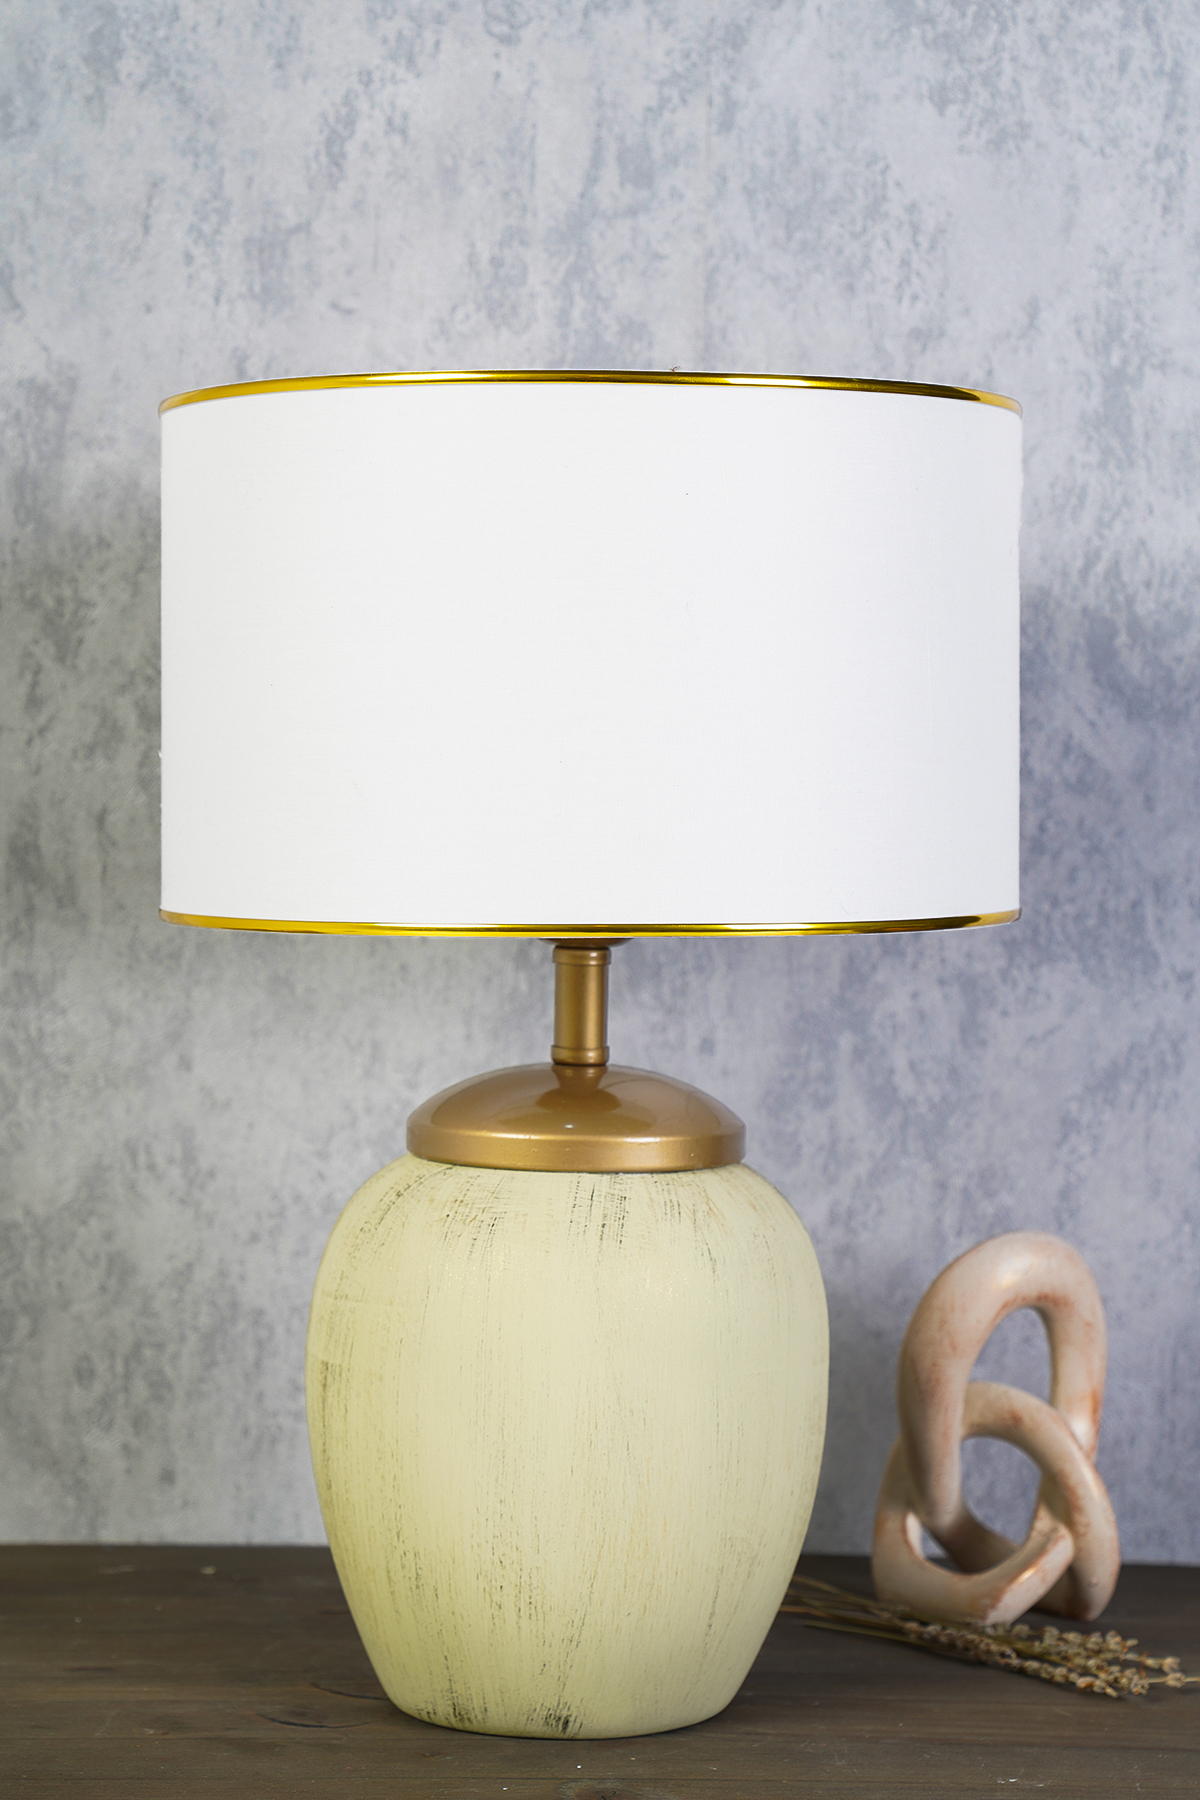 Sauterelle Lampshade Yl261